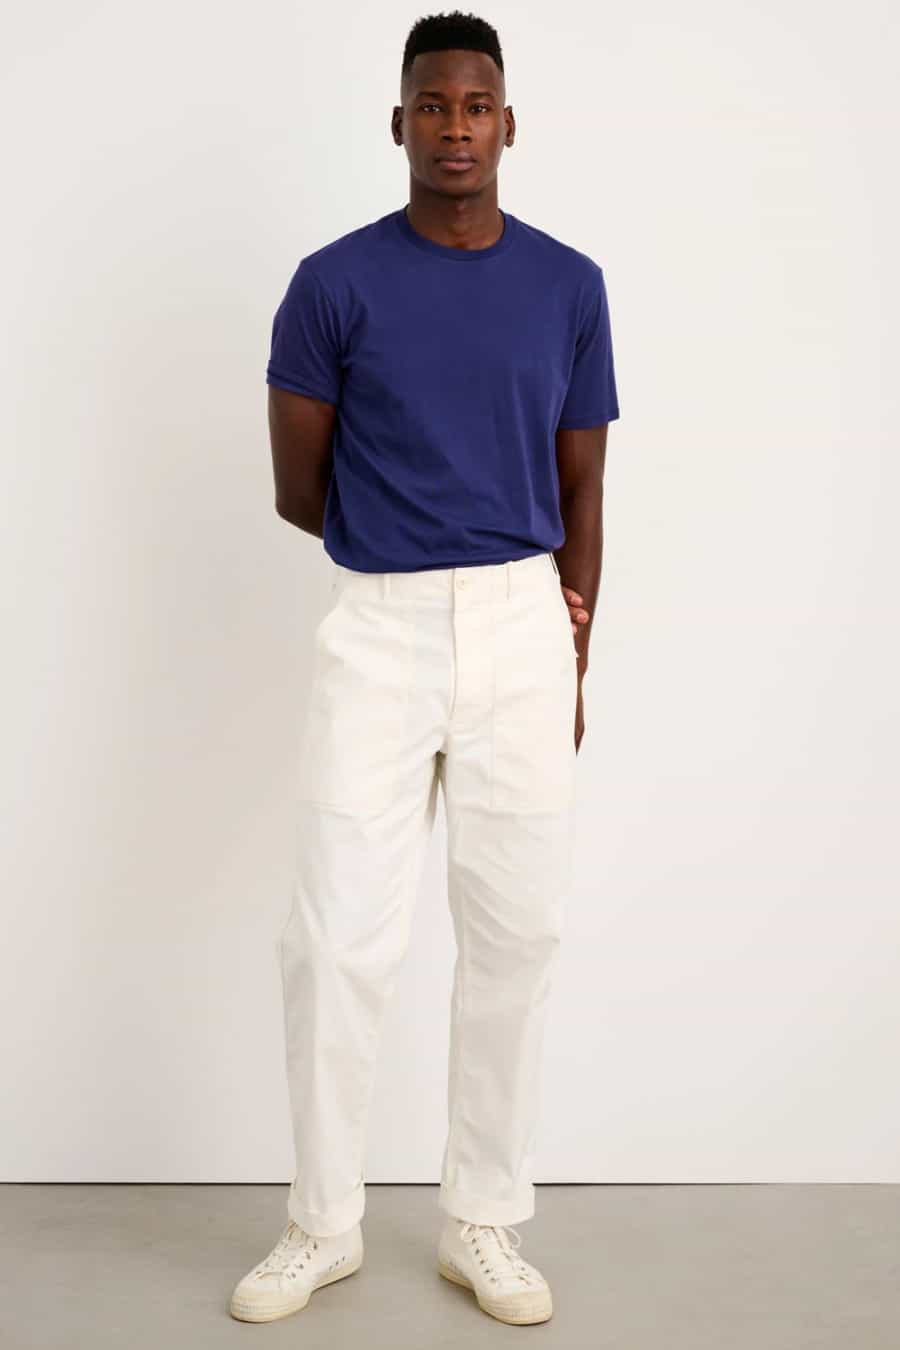 Men's relaxed white pants, blue T-shirt and white sneakers outfit